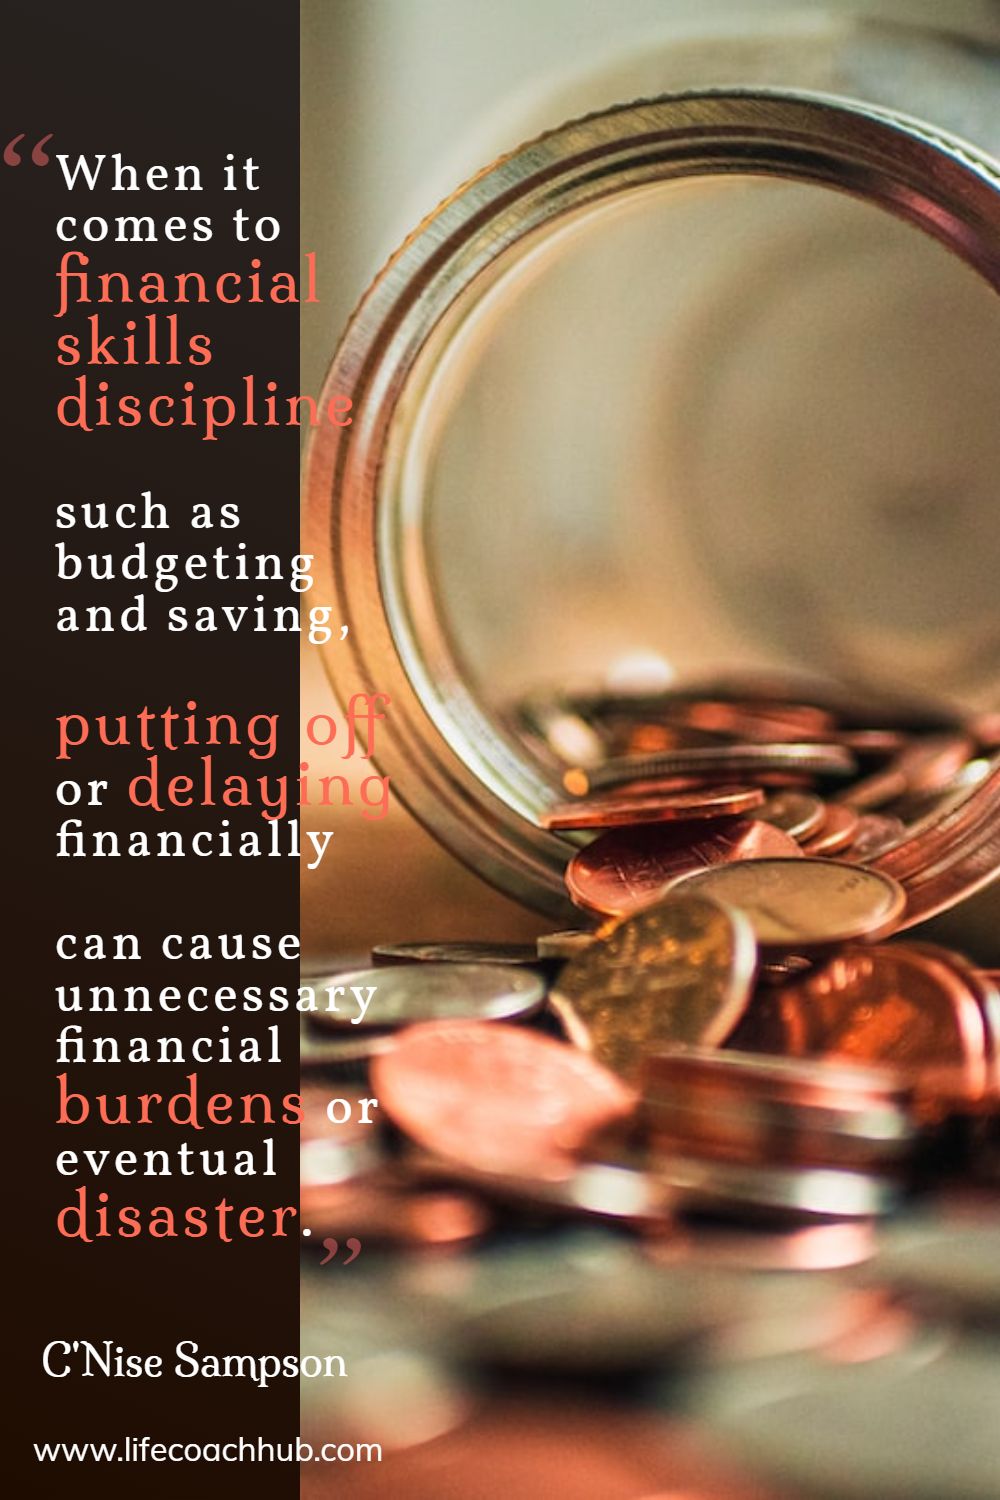 When it comes to financial skills discipline such as budgeting and saving, putting off or delaying financially can cause unnecessary financial burdens or eventual disaster. C'Nise Sampson Coaching Quote